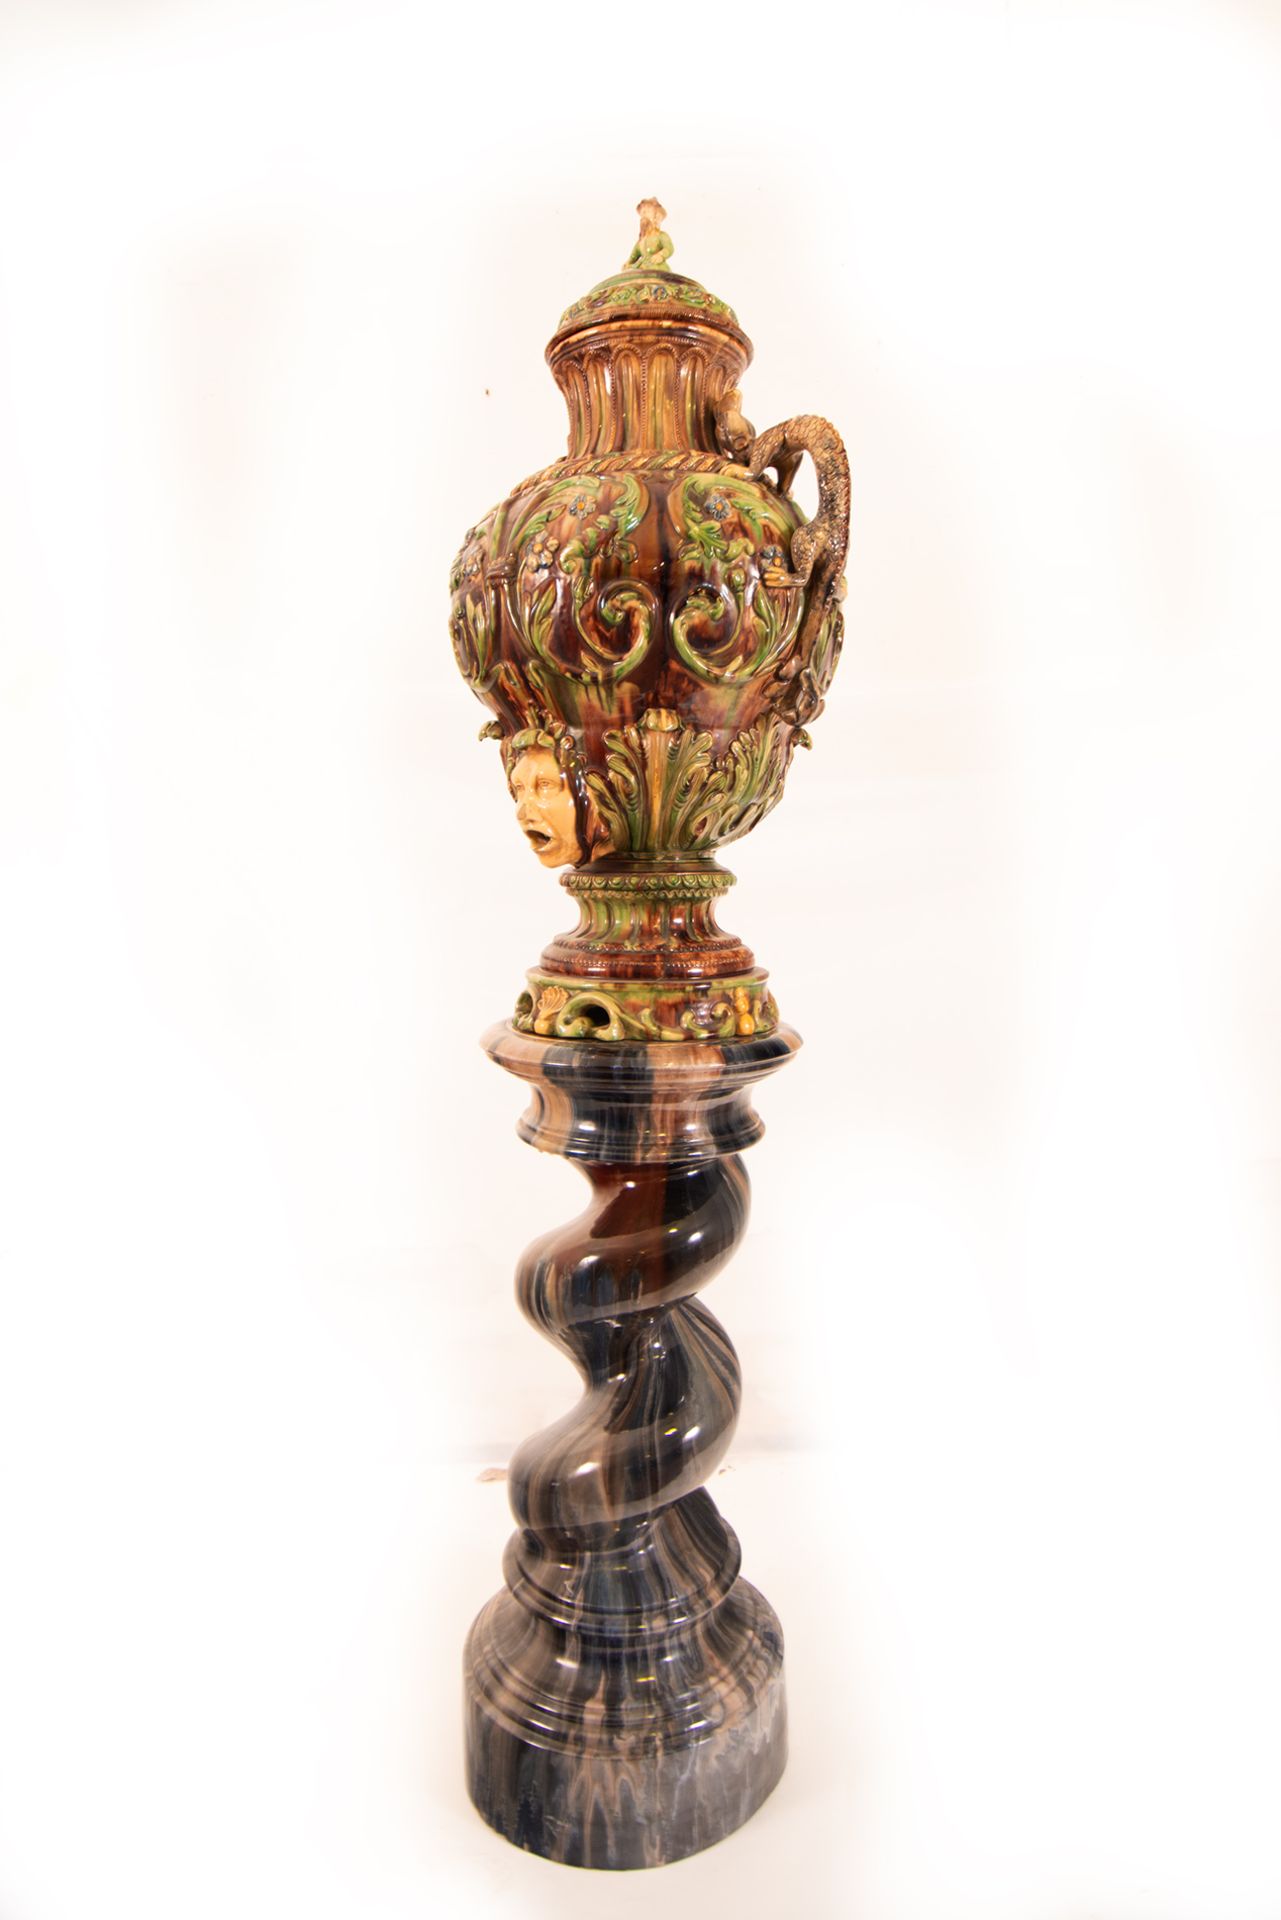 Ewer in enameled stoneware in the Art Nouveau style, French or Italian school of the 19th - 20th cen - Bild 2 aus 11